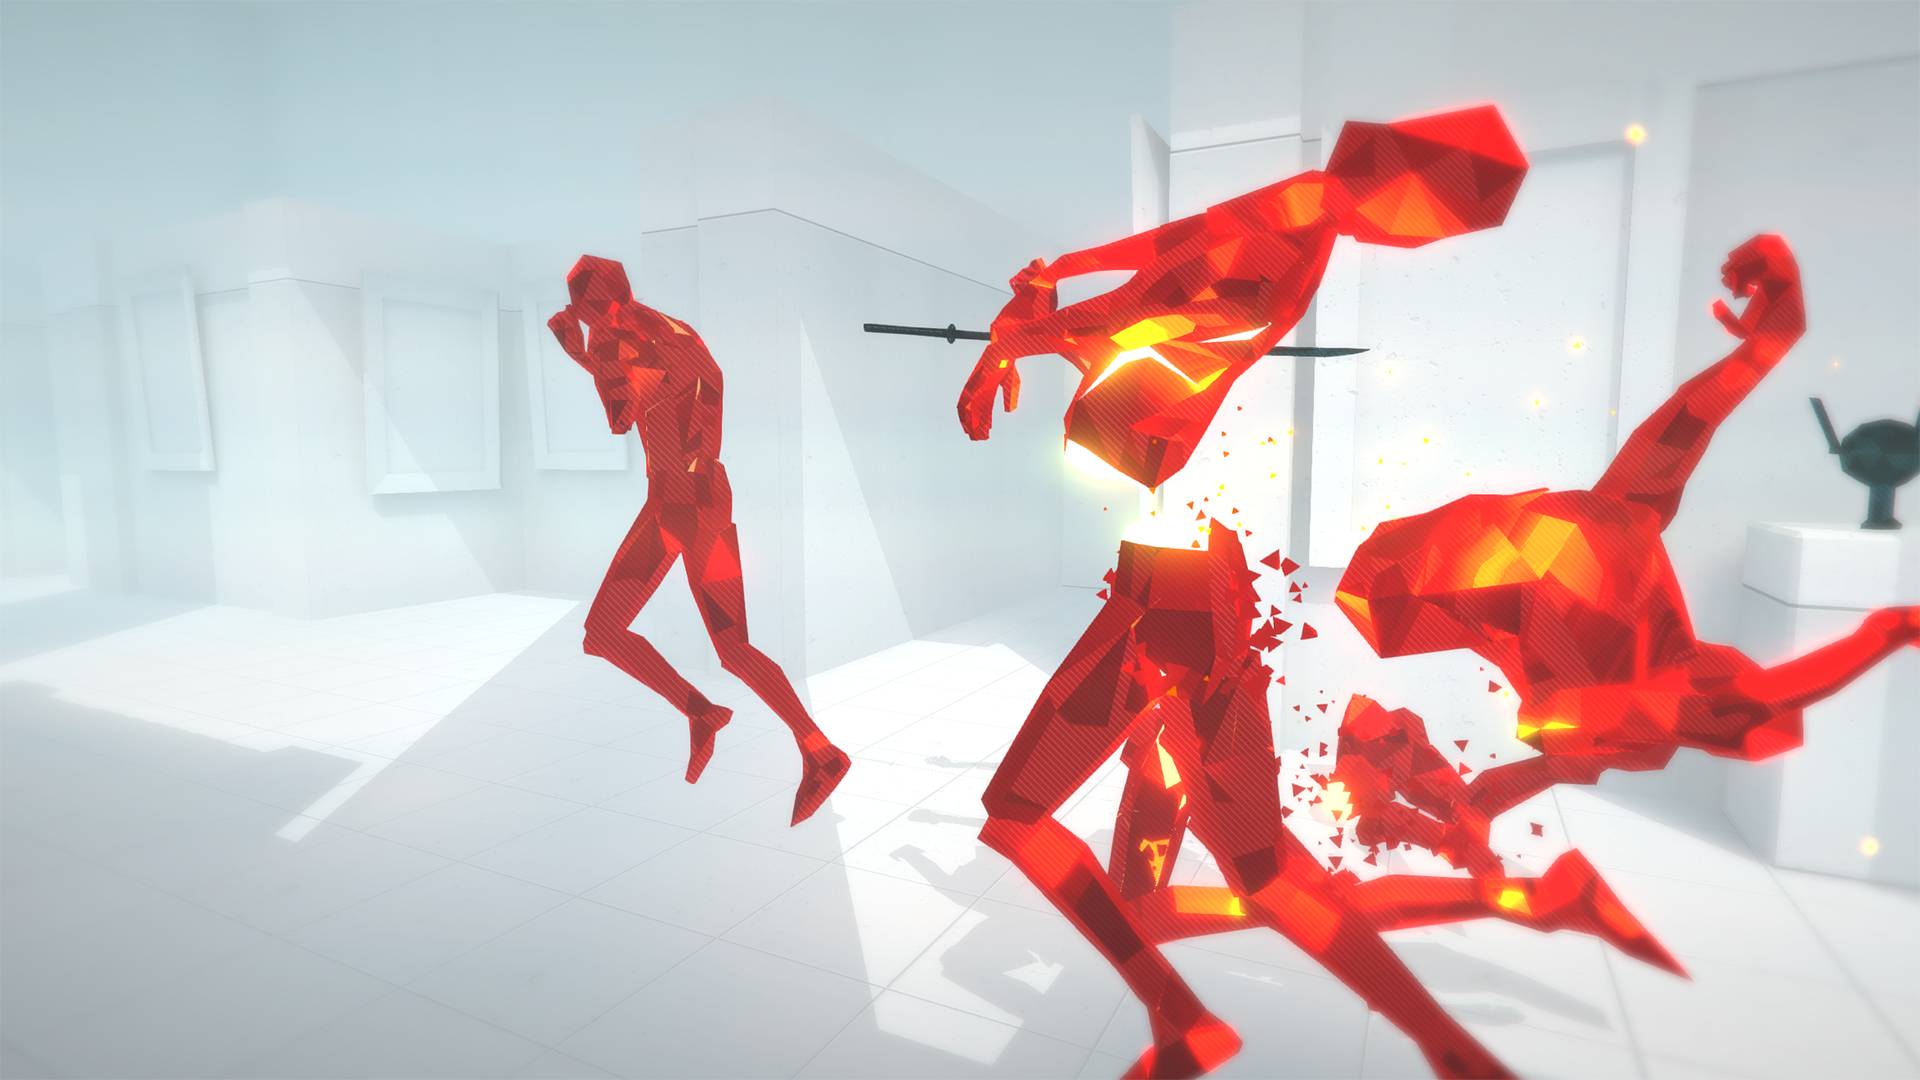 best FPS games: a red humanoid figure falling apart, with another raising a gun in the background